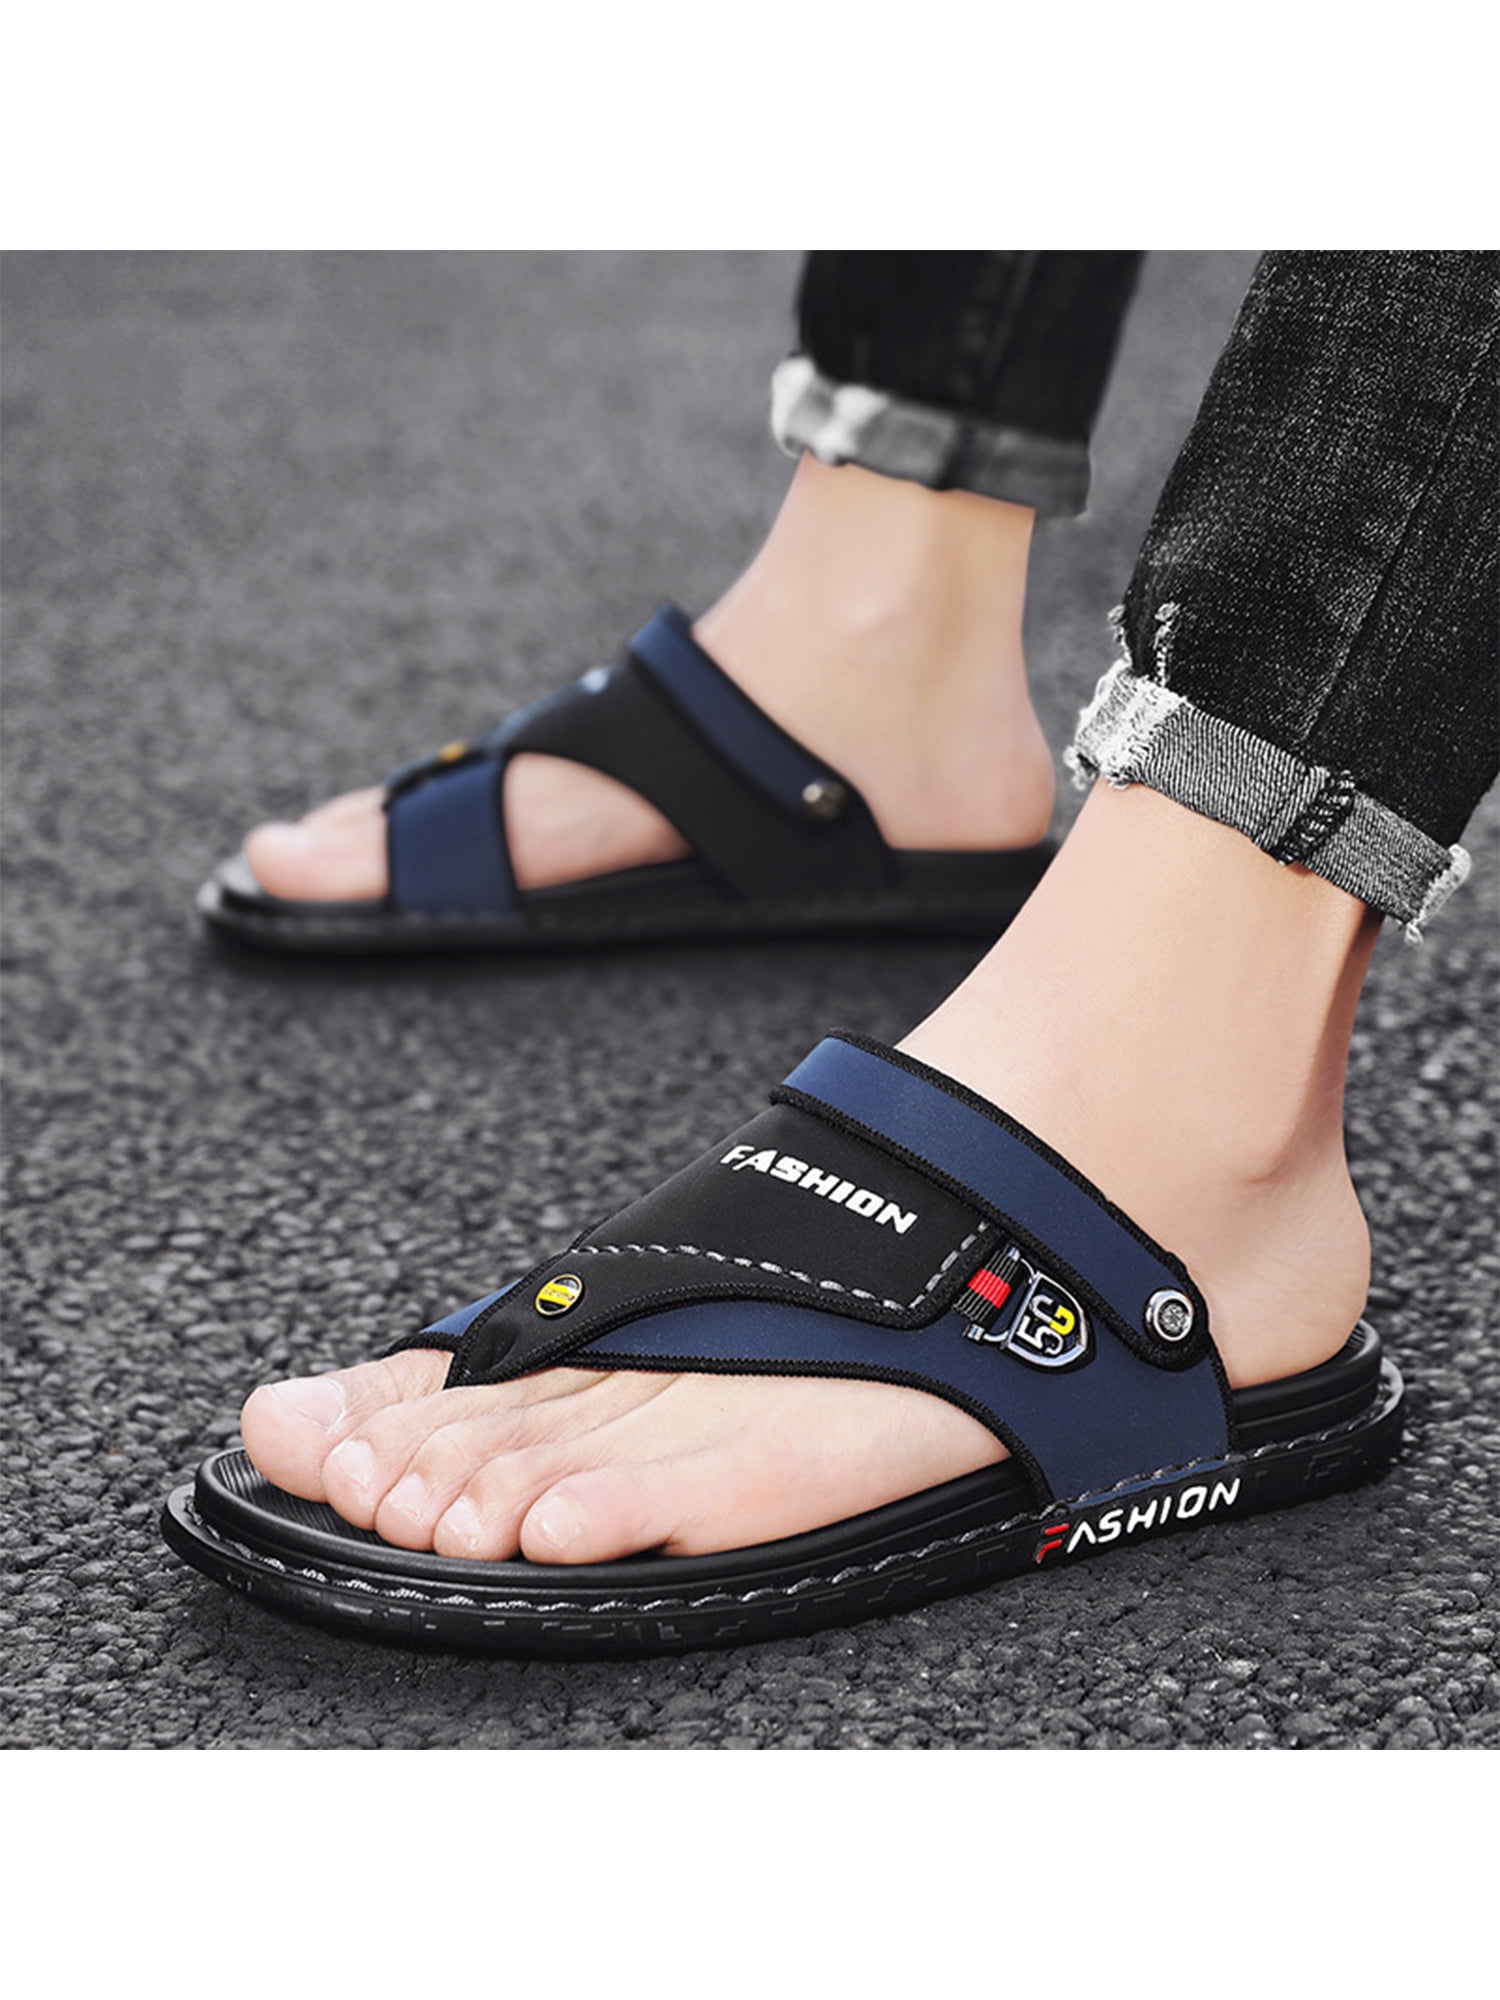 Details about   Unisex Adults Slide-Proof Quick-Dry Shoes Outdoor Beach Walking Swiming Casual 